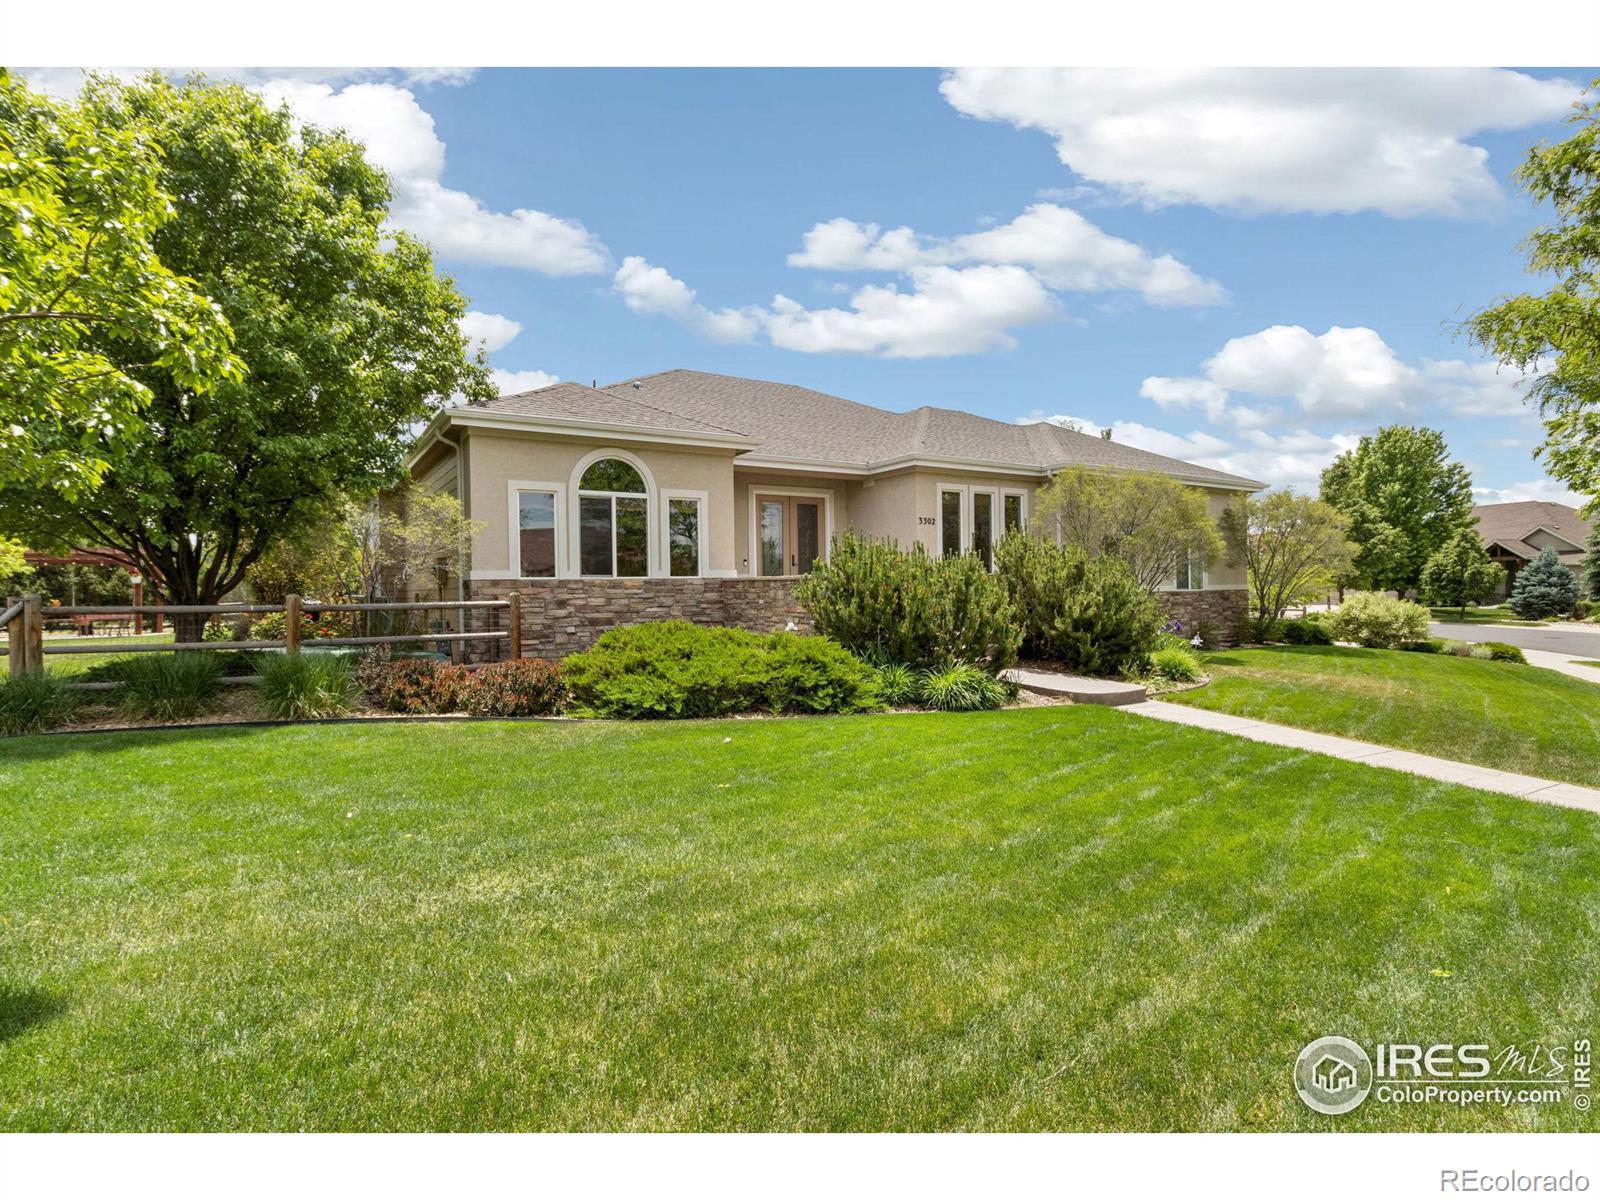 Report Image for 3302  Buntwing Lane,Fort Collins, Colorado